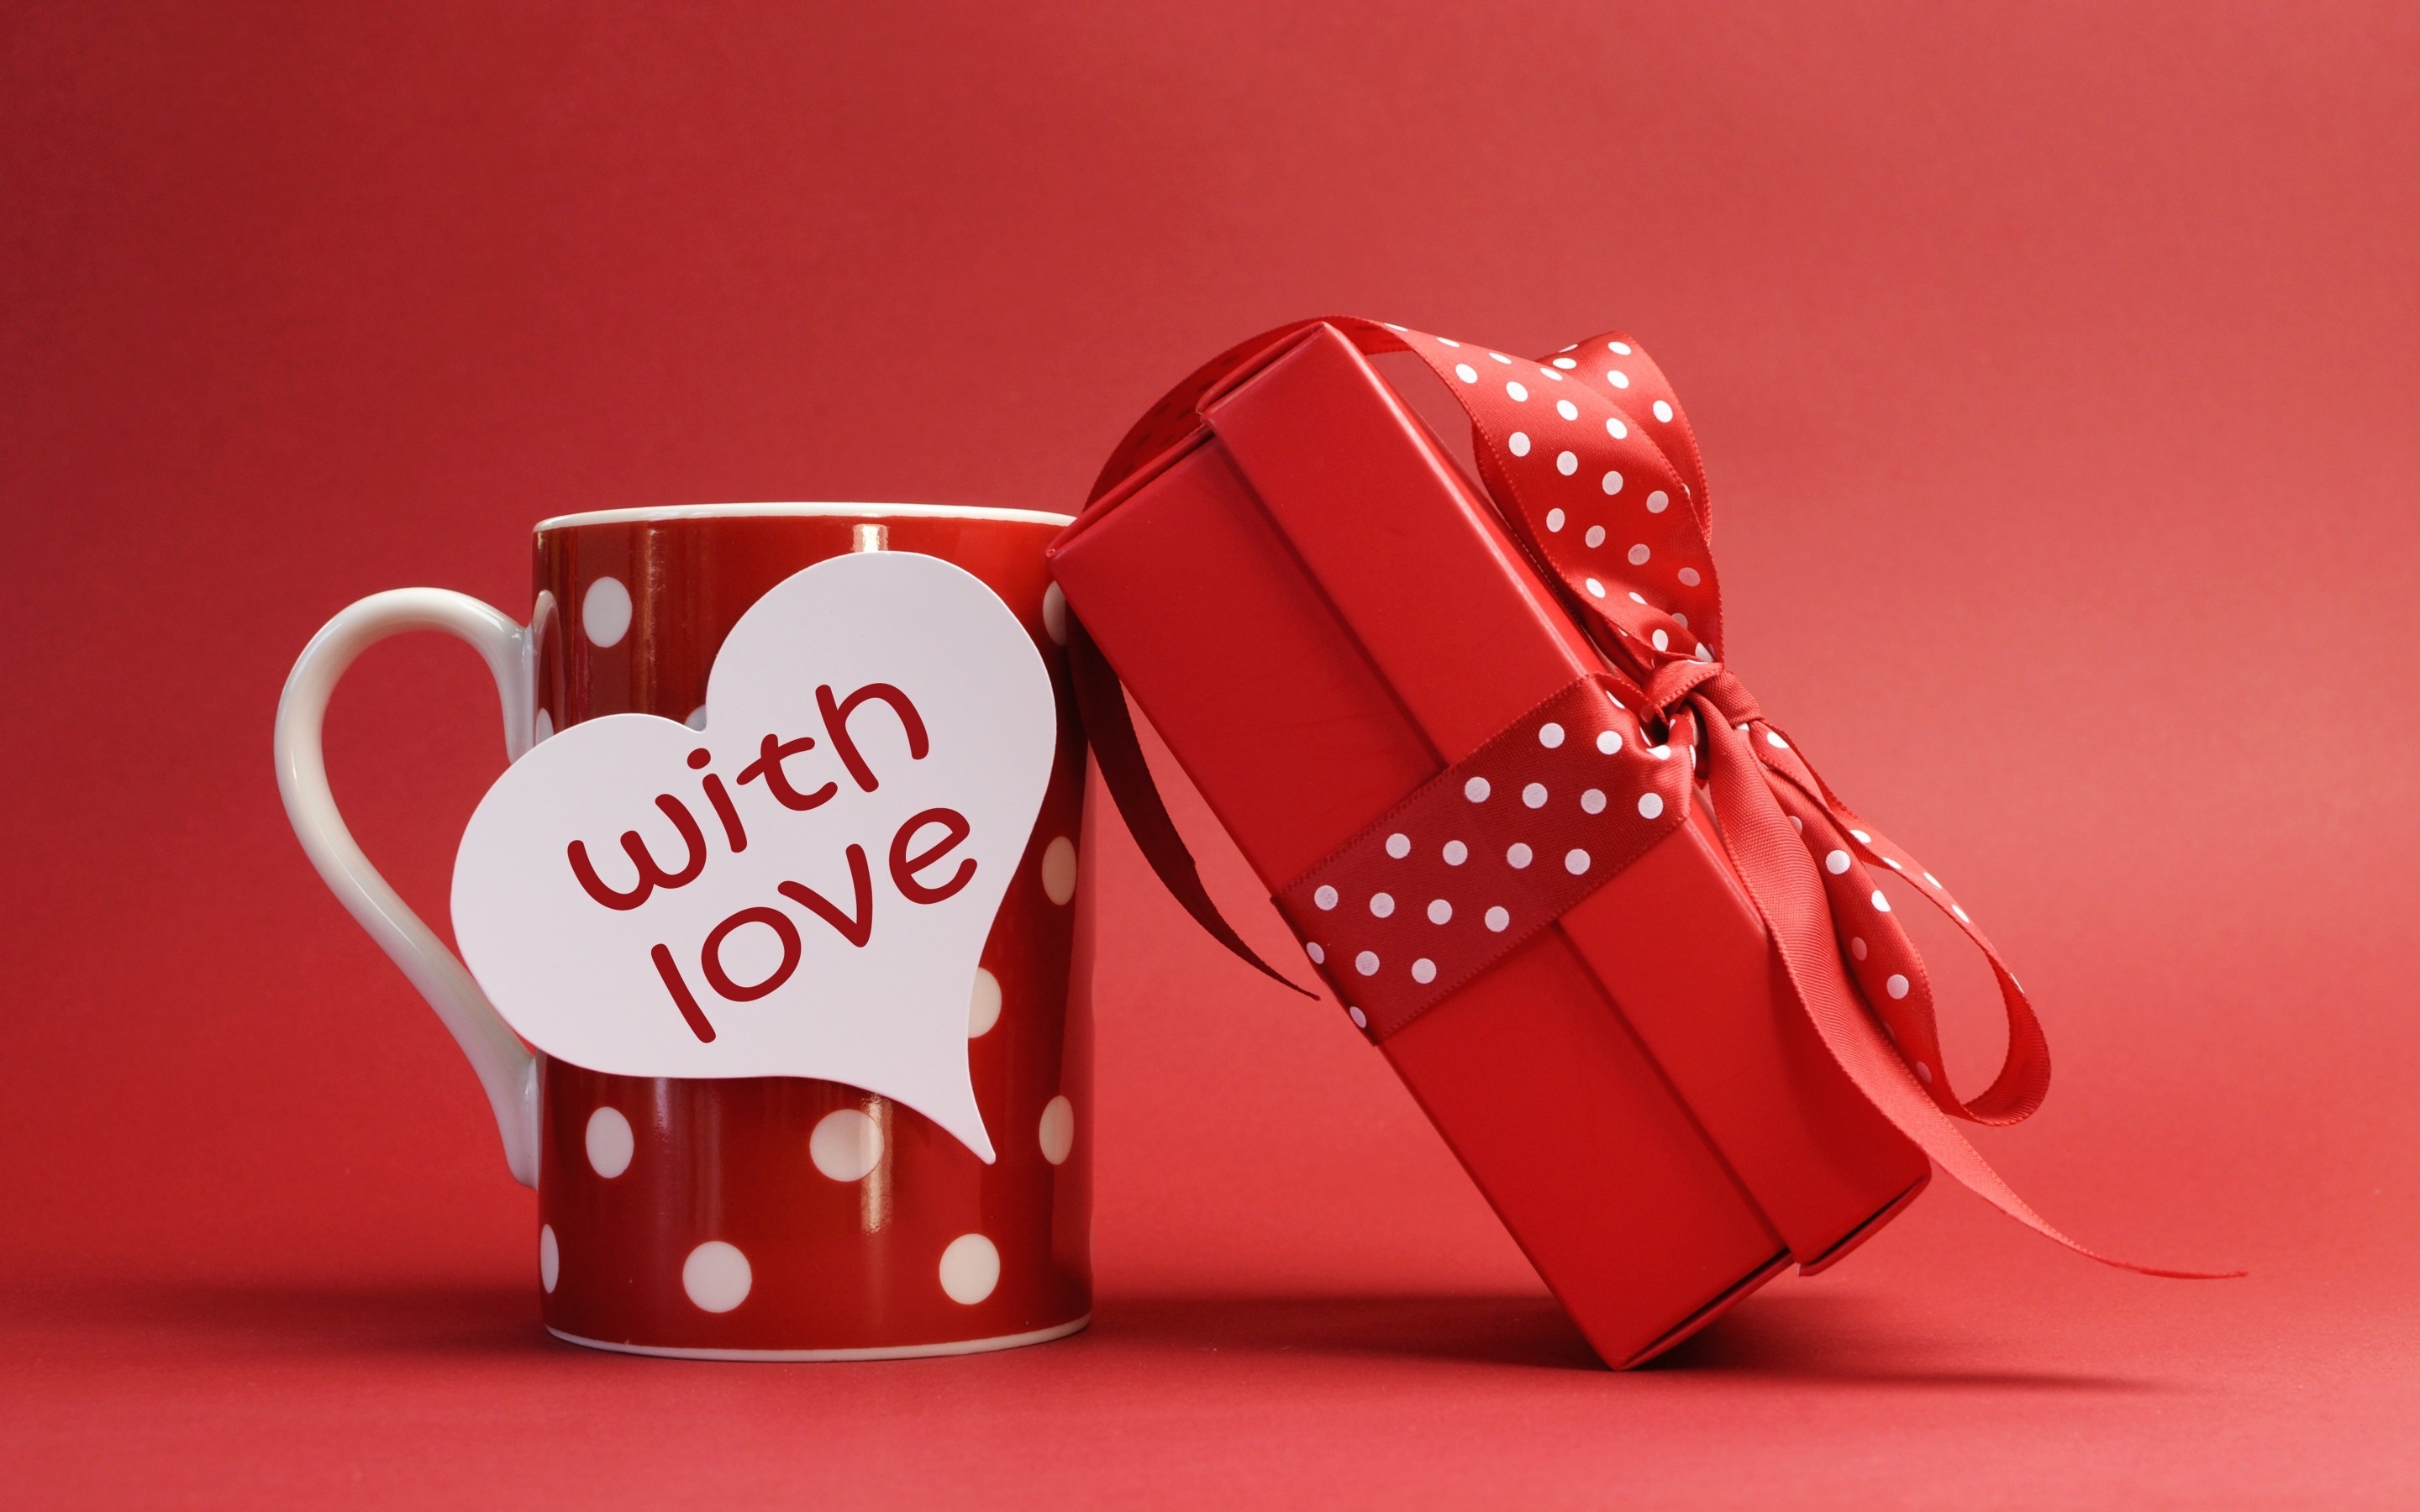 Gift With Love for 2880 x 1800 Retina Display resolution